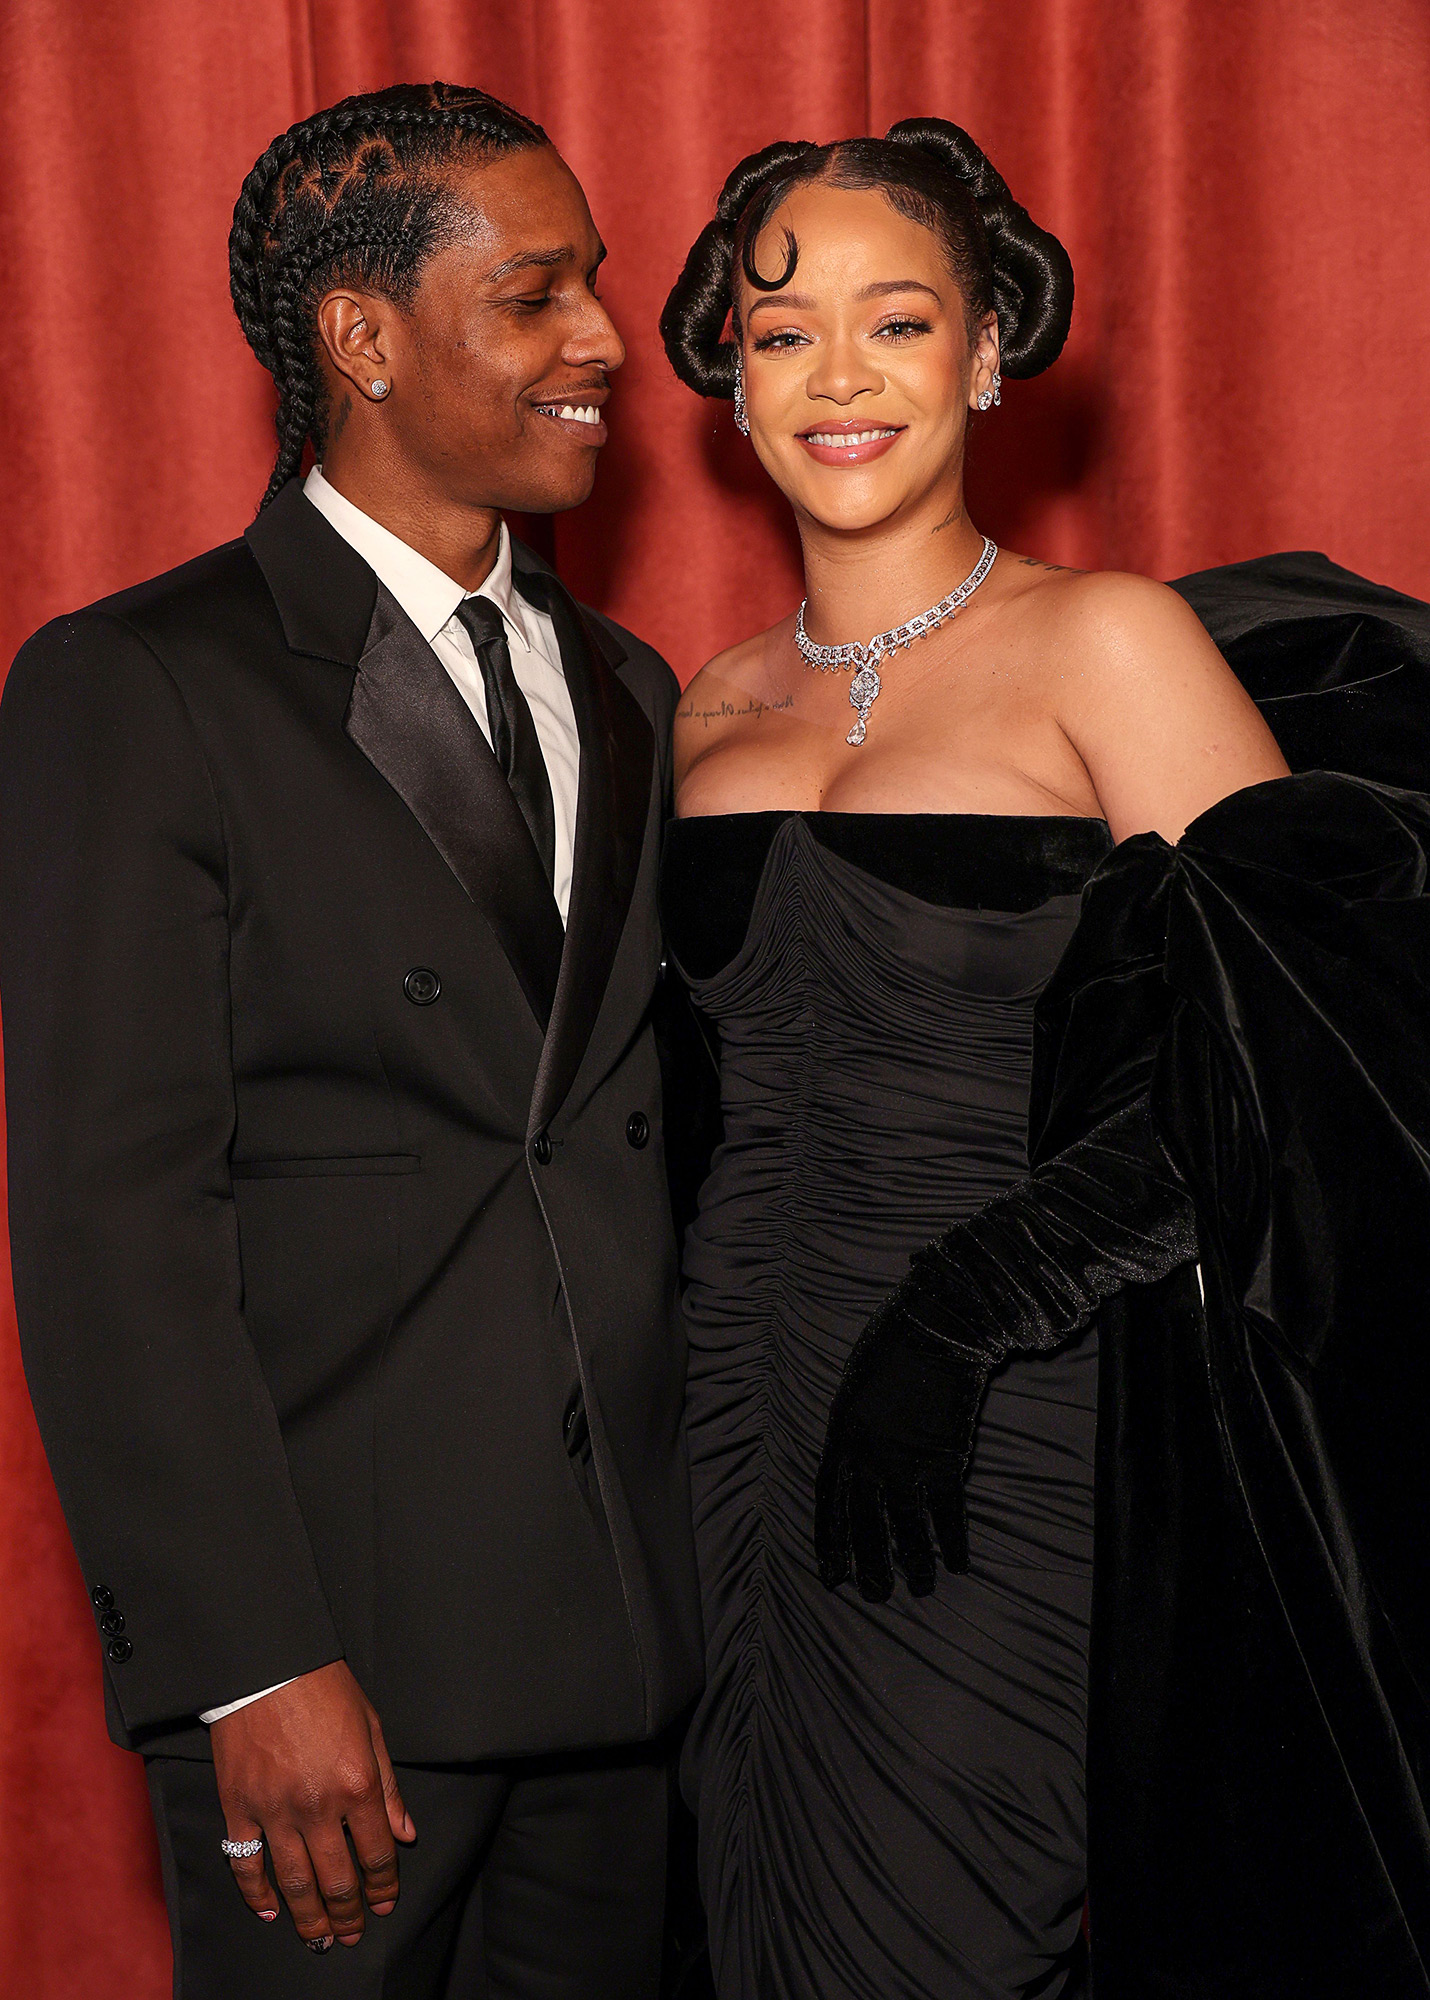 ASAP Rocky and Rihanna have got couple dressing down